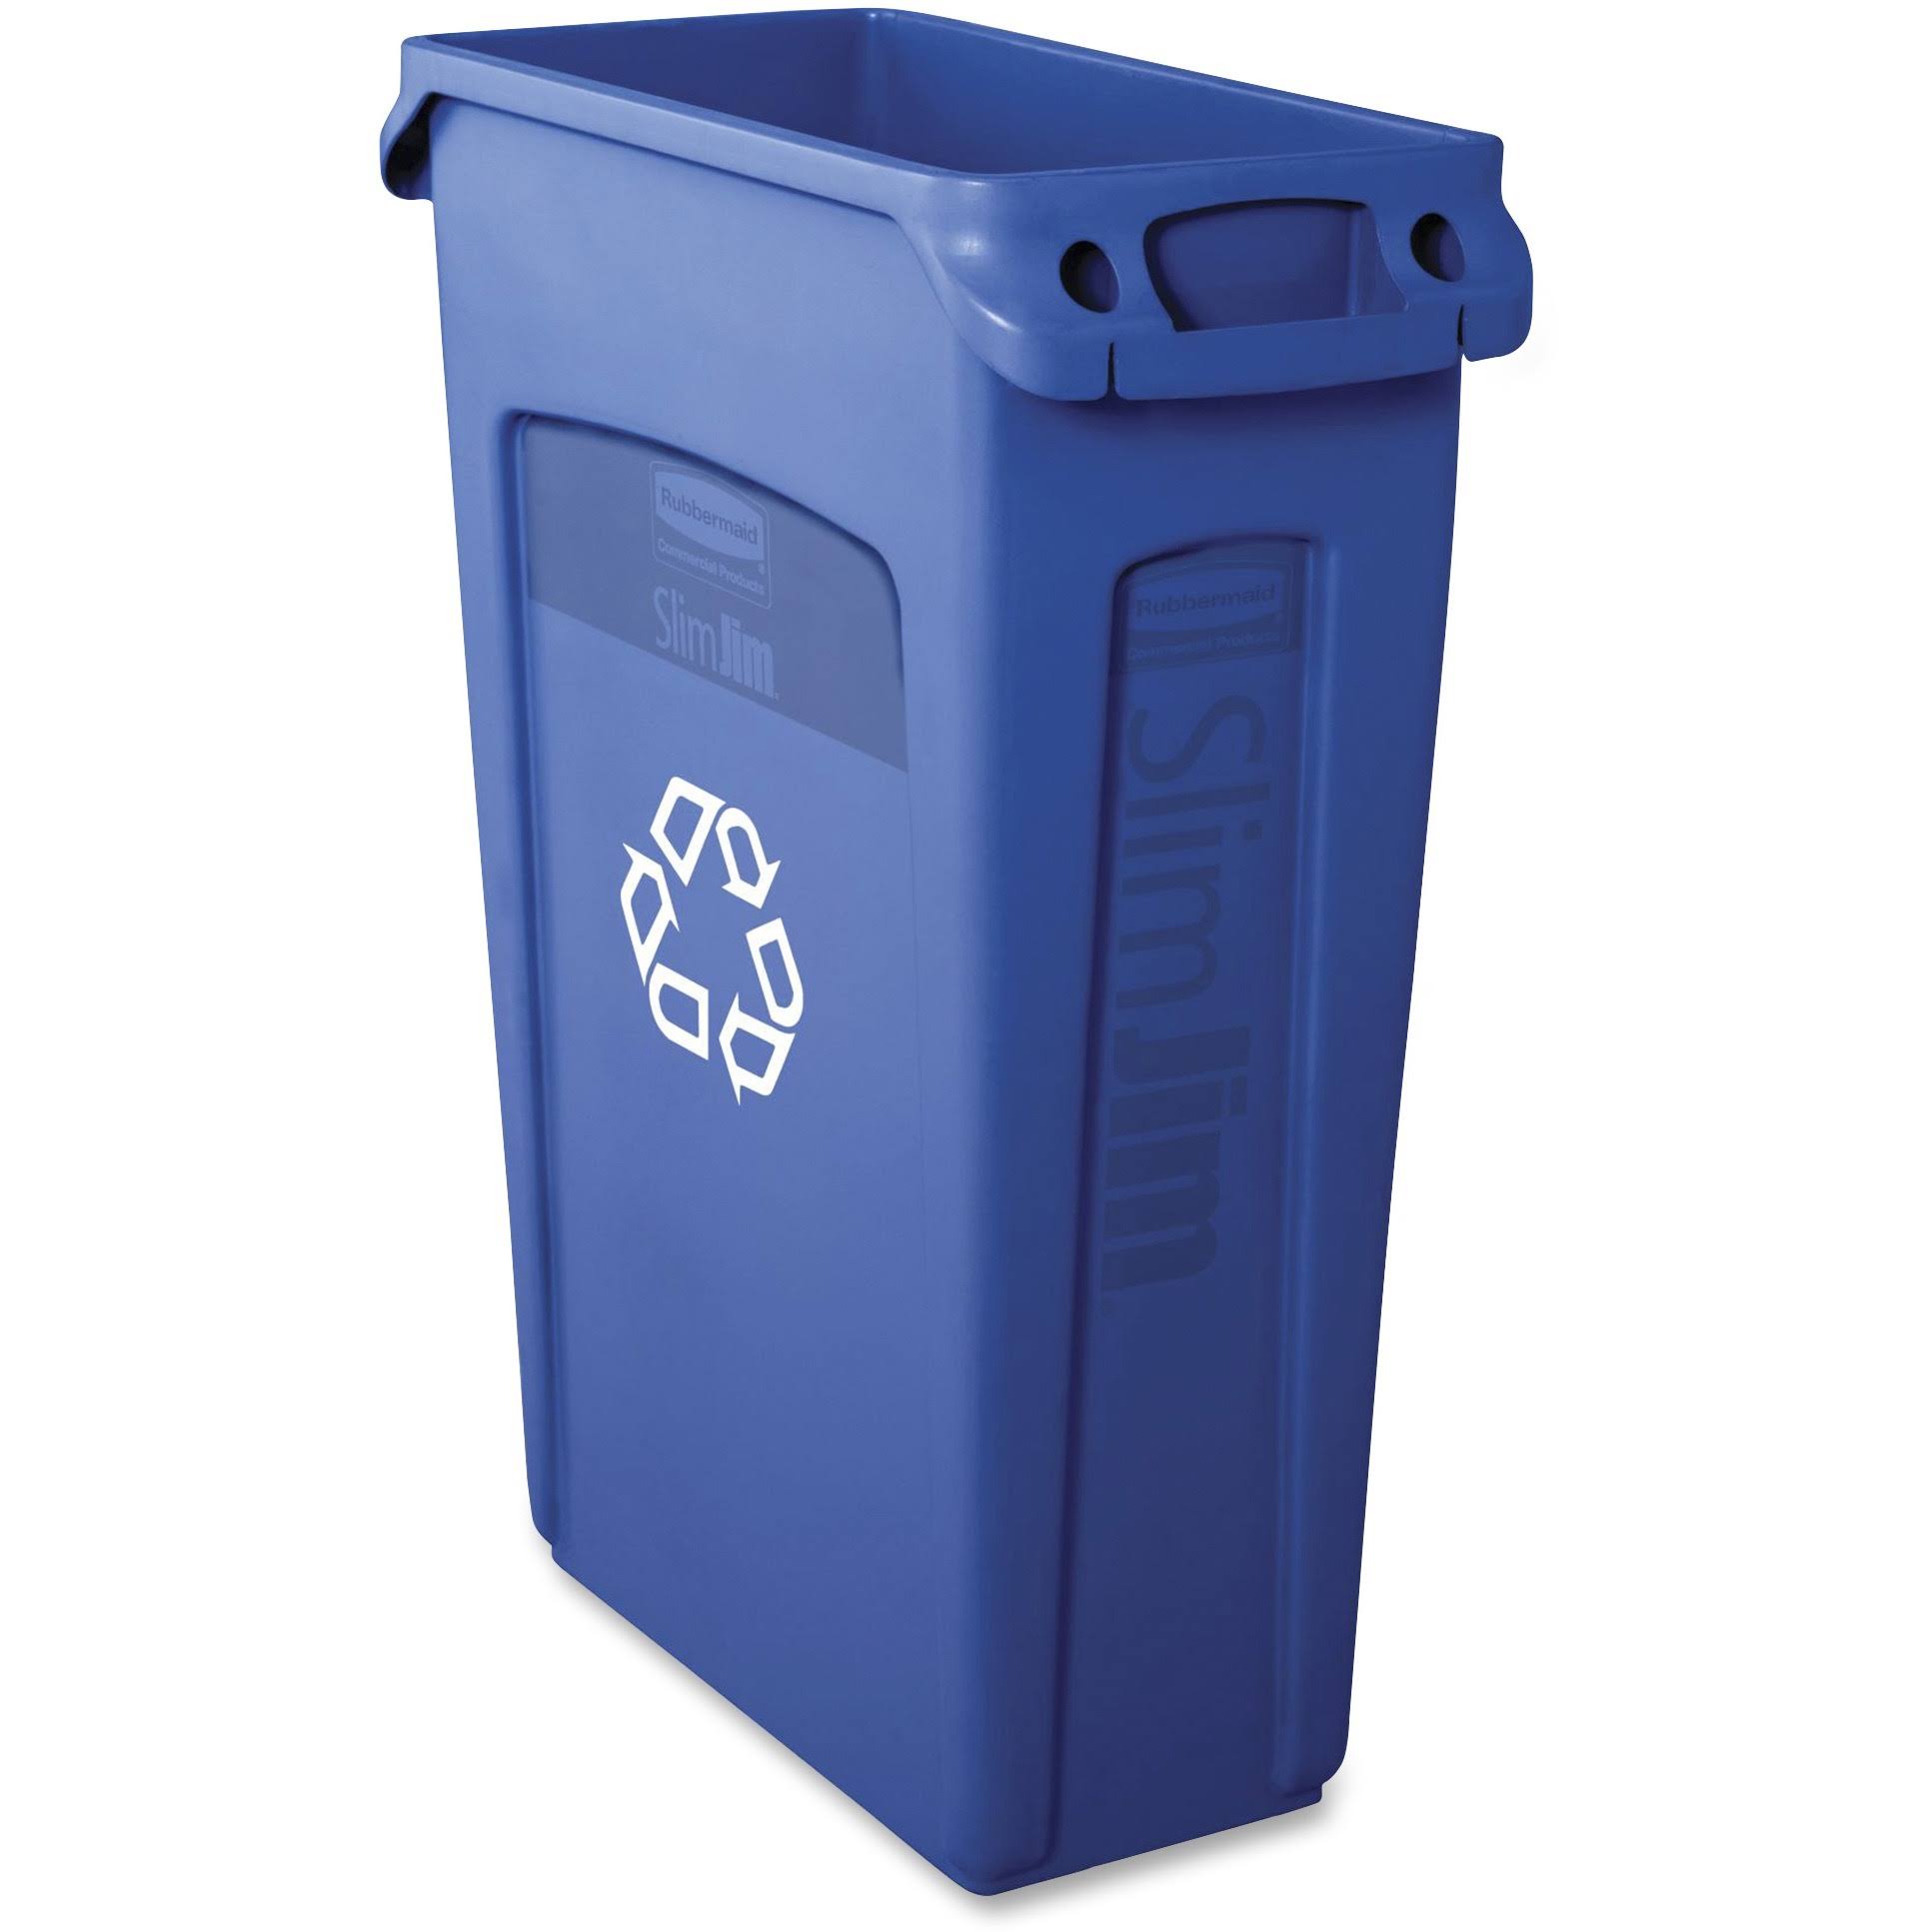 Rubbermaid Commercial Slim Jim Recycling Container with Venting Channels - Blue